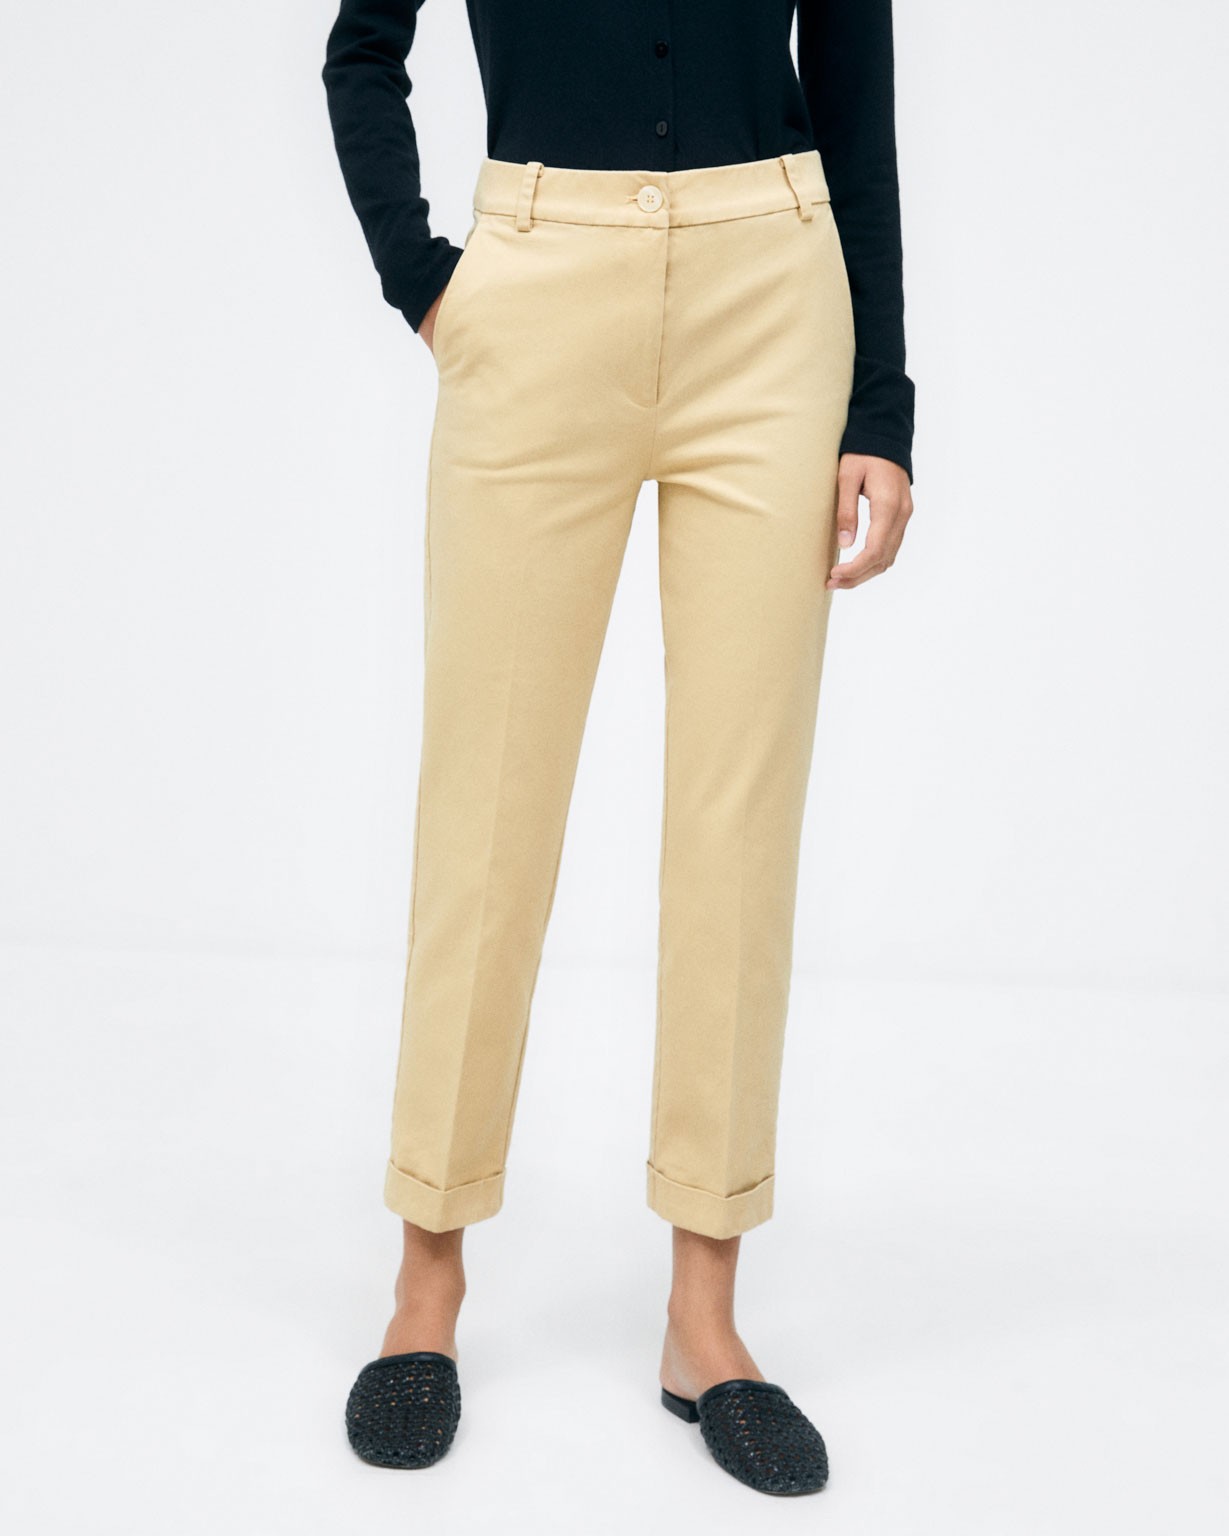 Straight ankle long trousers. Chino type. Plain  Beige